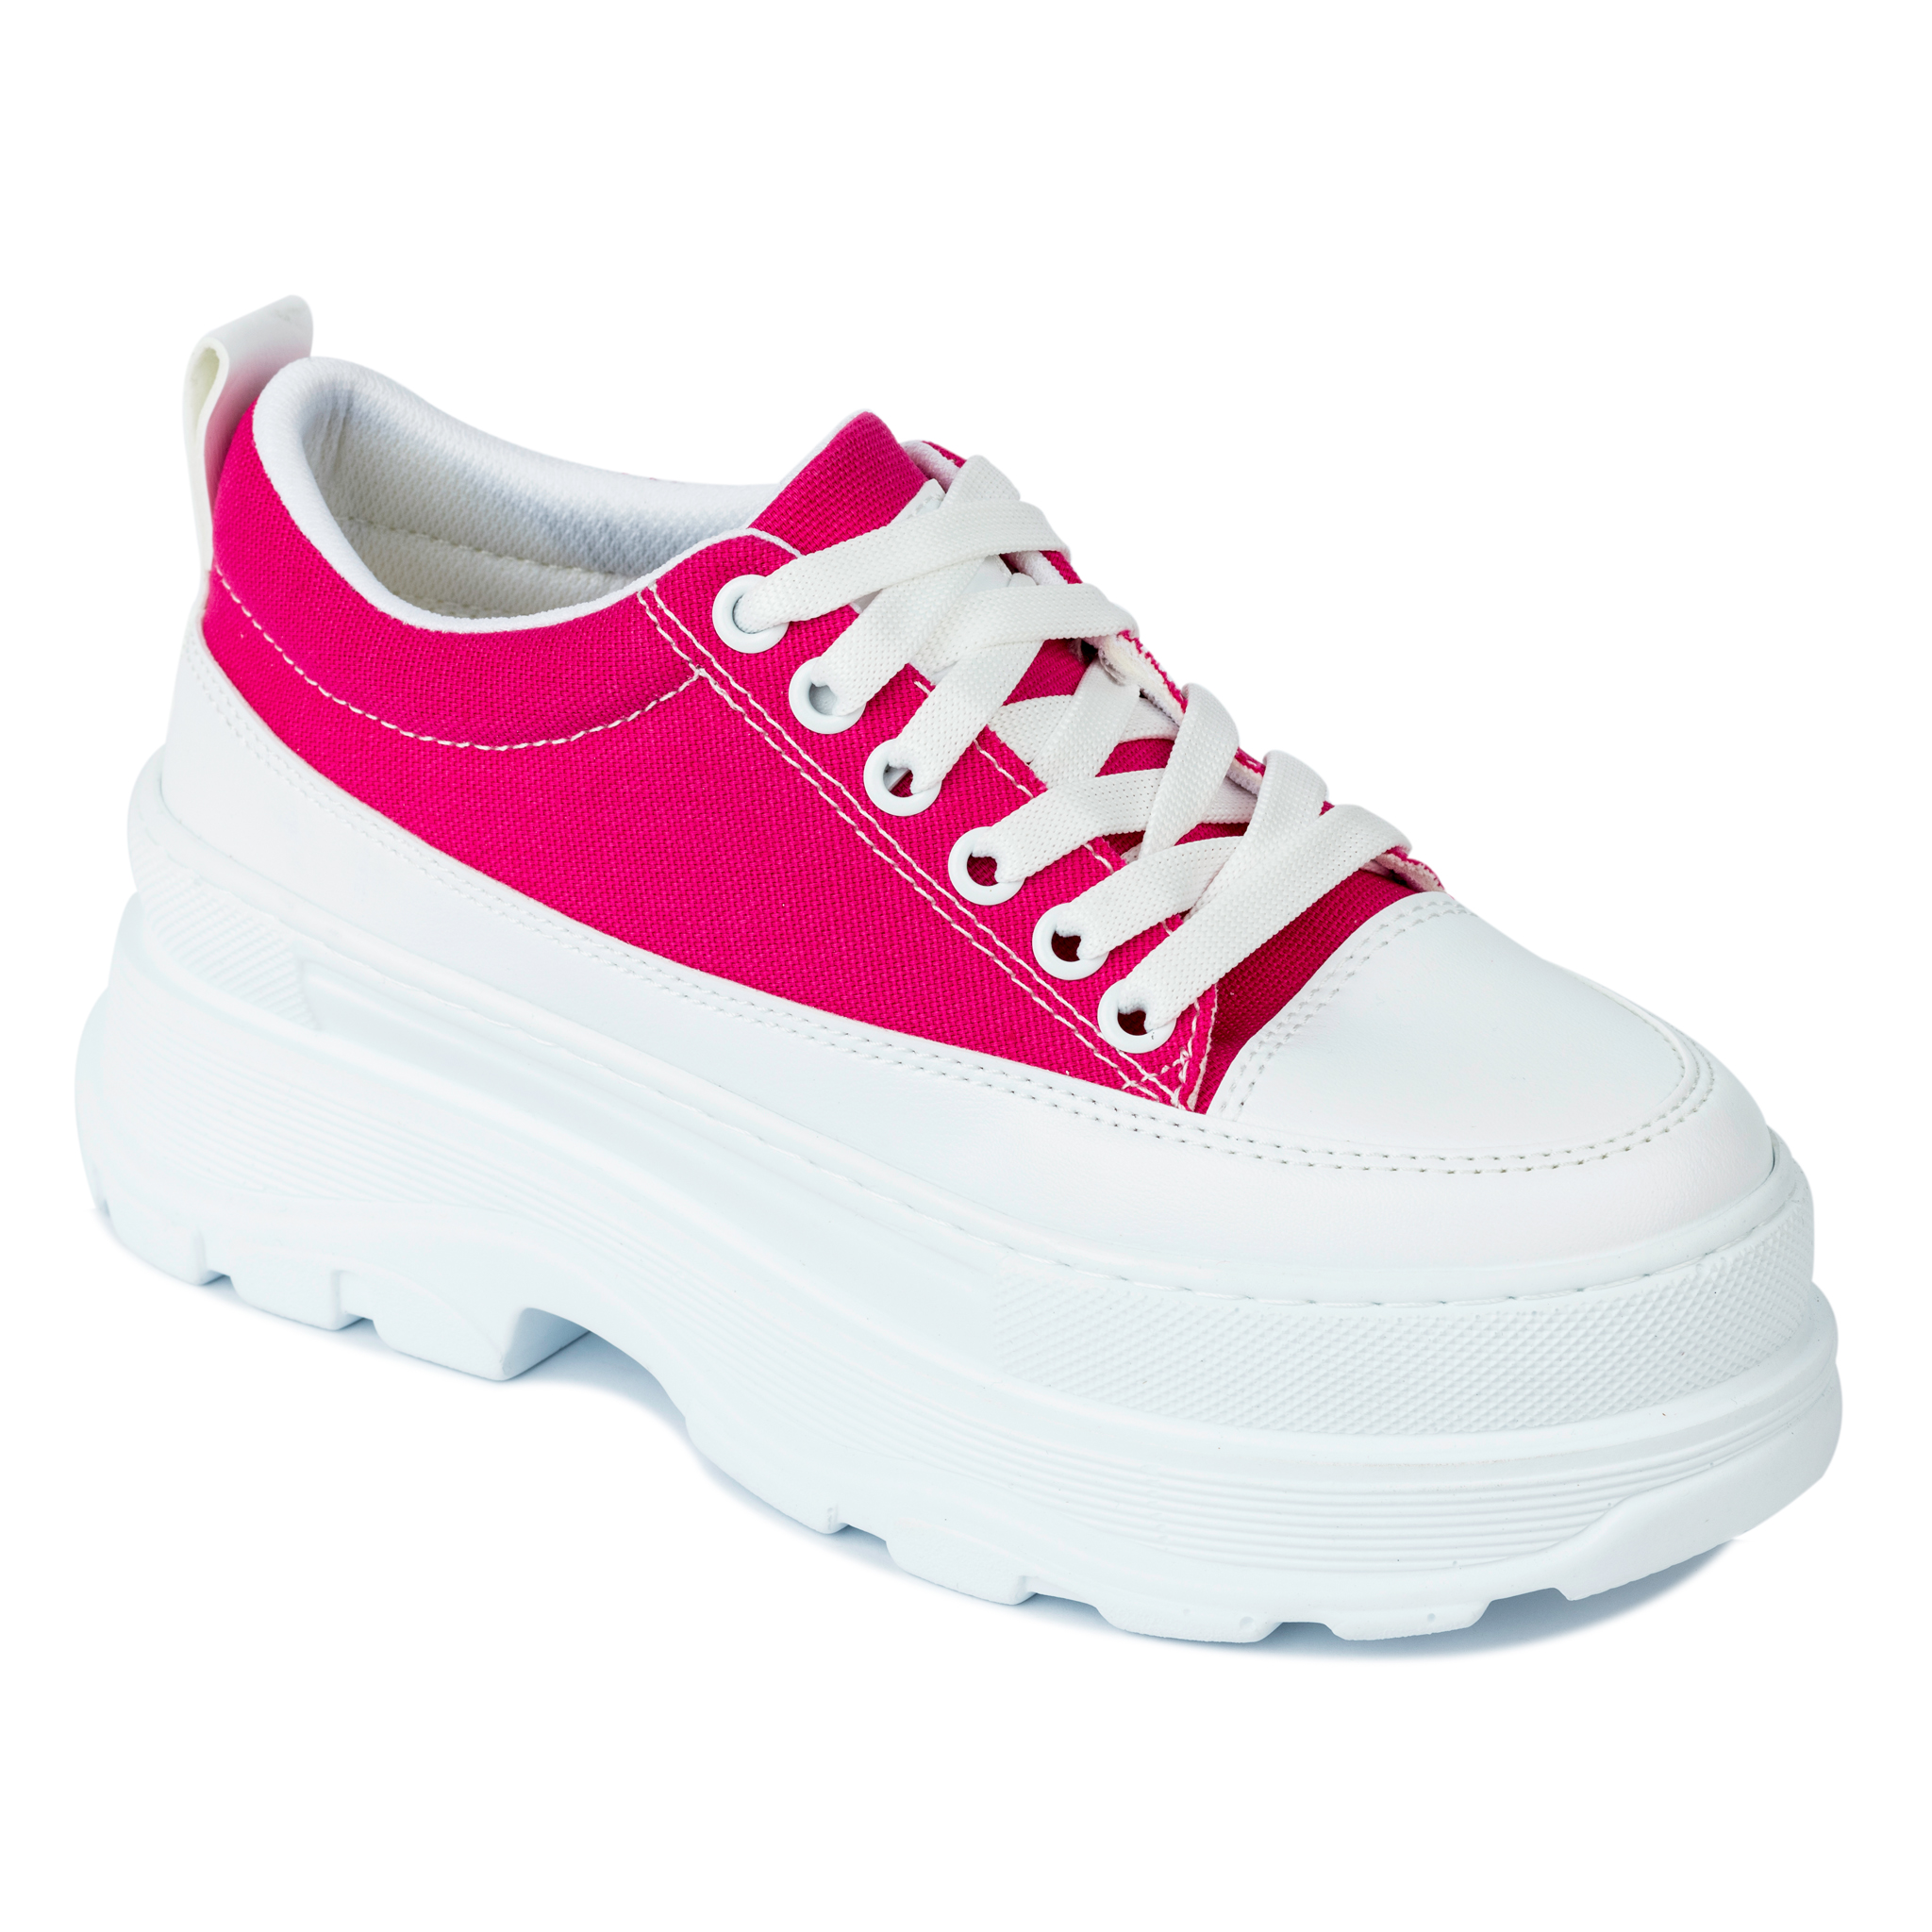 HIGH SOLE SNEAKERS - PINK